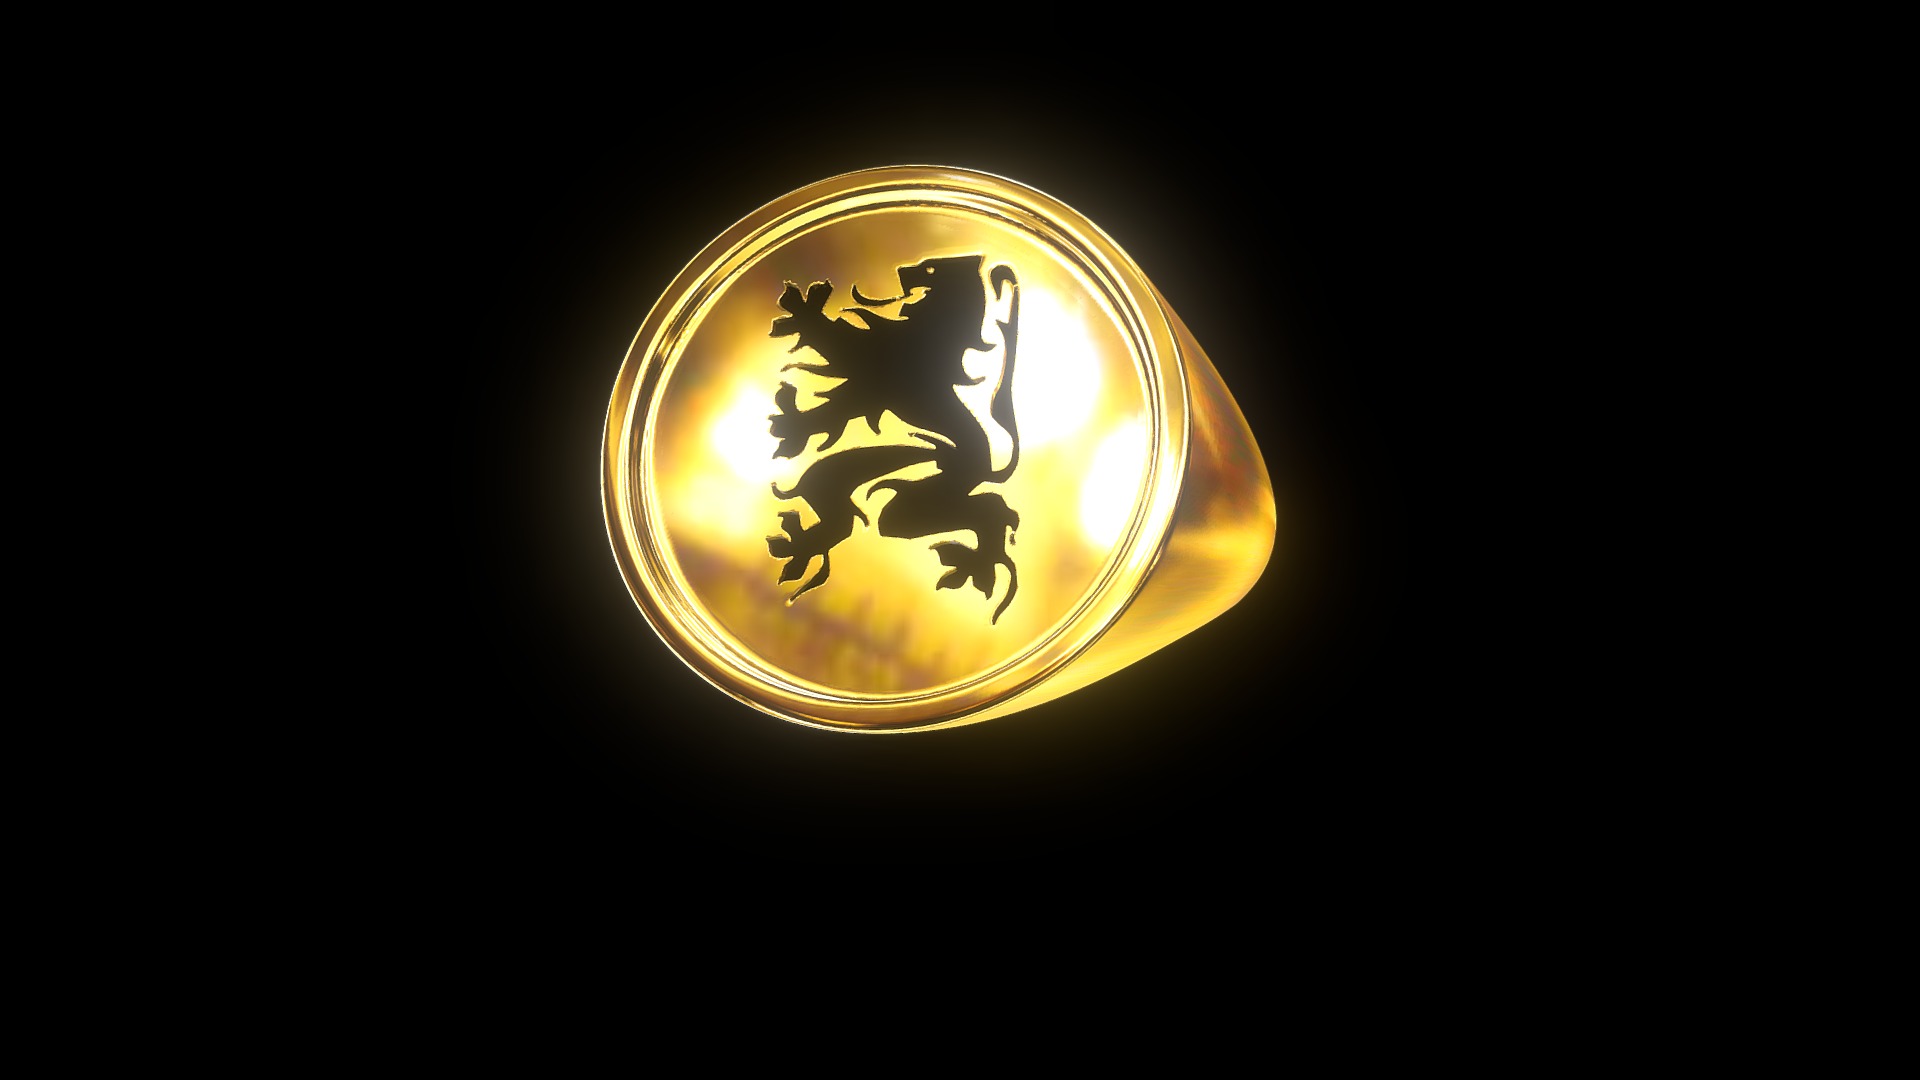 3D model Flanders’s Lion gold ring - This is a 3D model of the Flanders's Lion gold ring. The 3D model is about a gold coin with a lion on it.